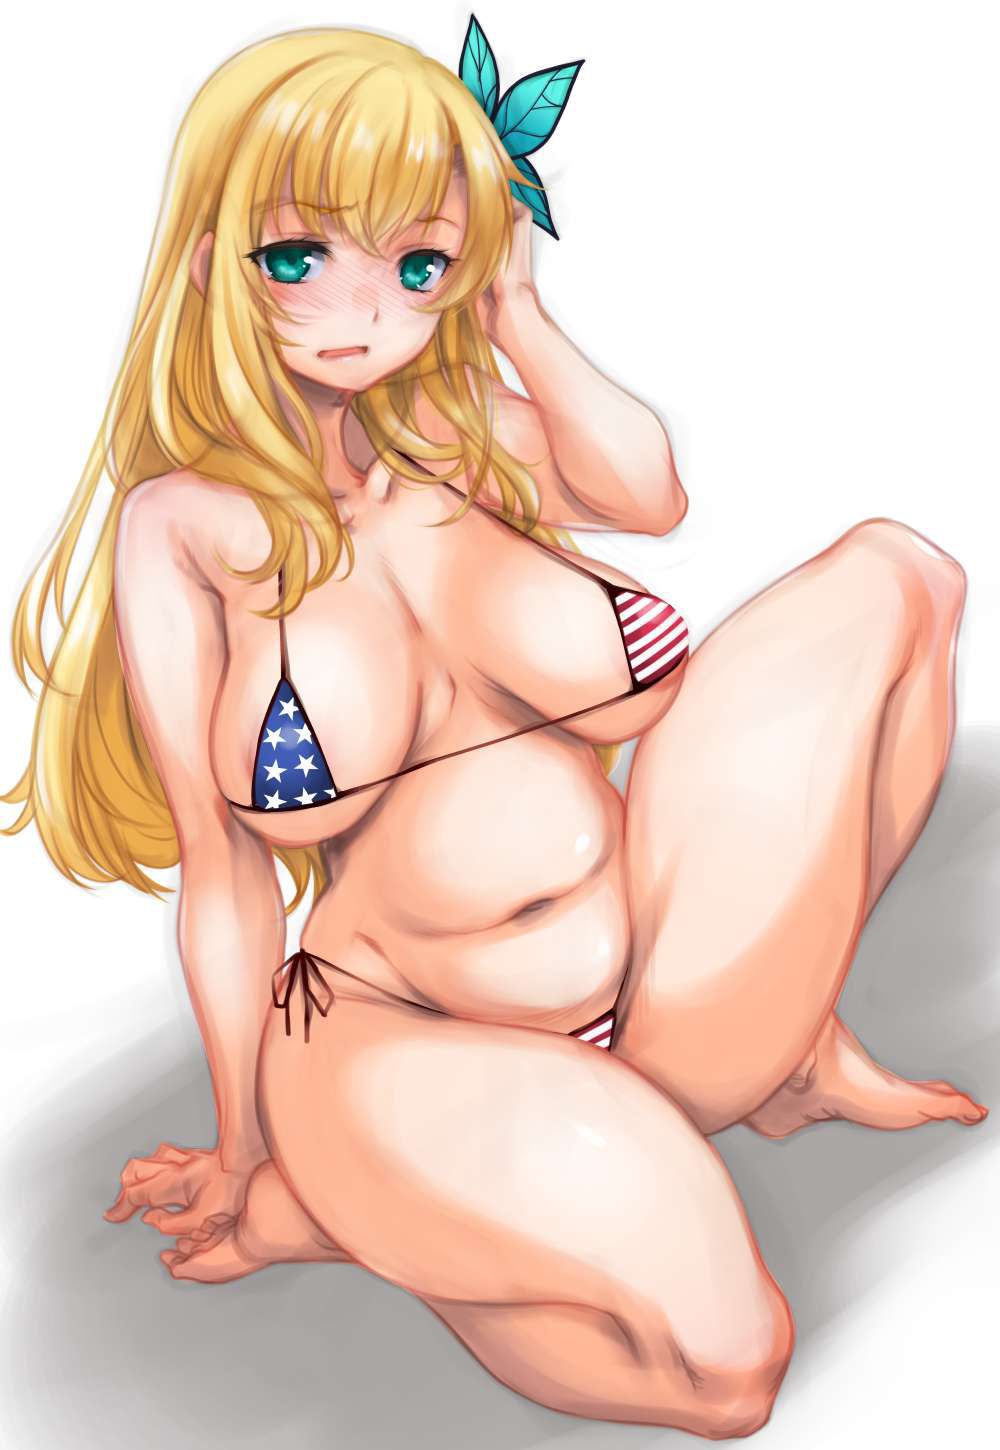 Erotic image Development that is common when you do a delusion to etch with Kashiwazaki Hoshina! (I have few friends.) 14